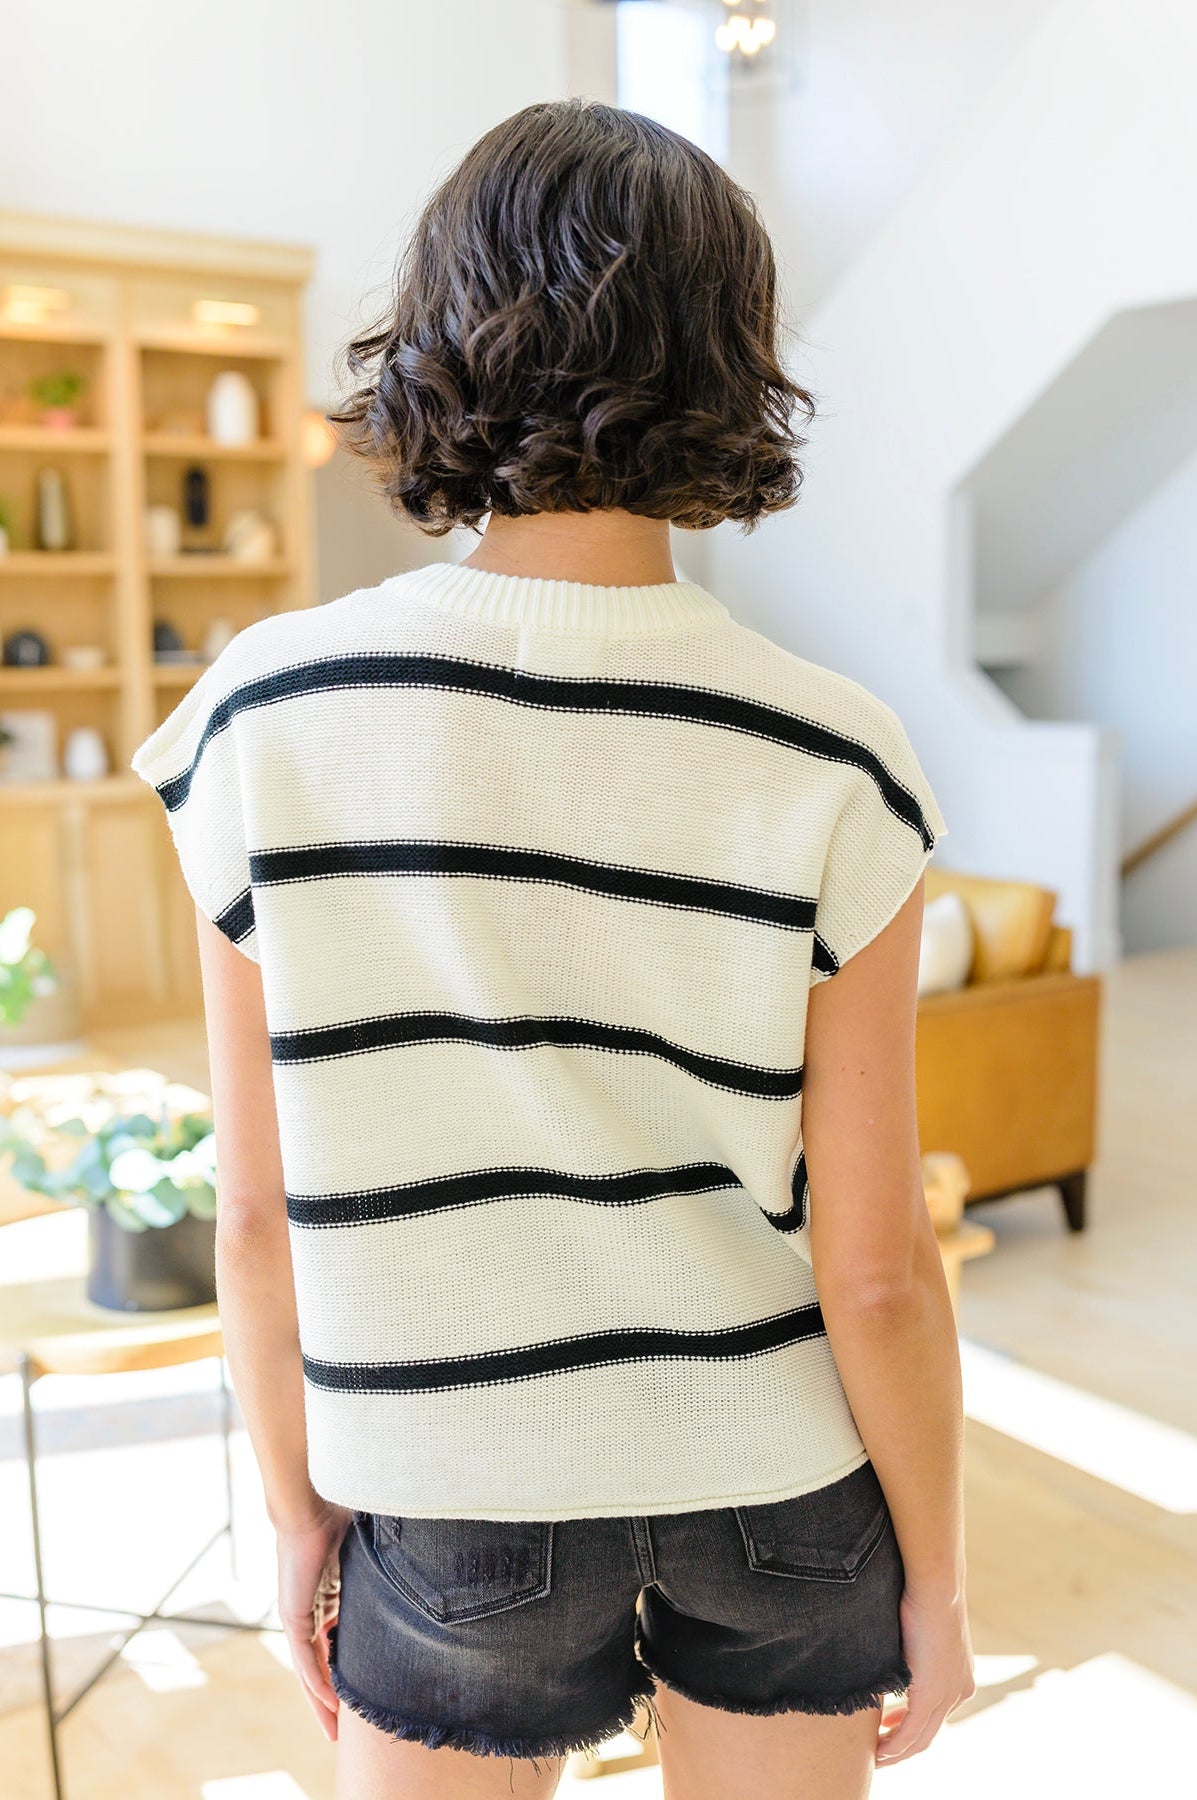 More or Less Striped Sleeveless Sweater Ave Shops